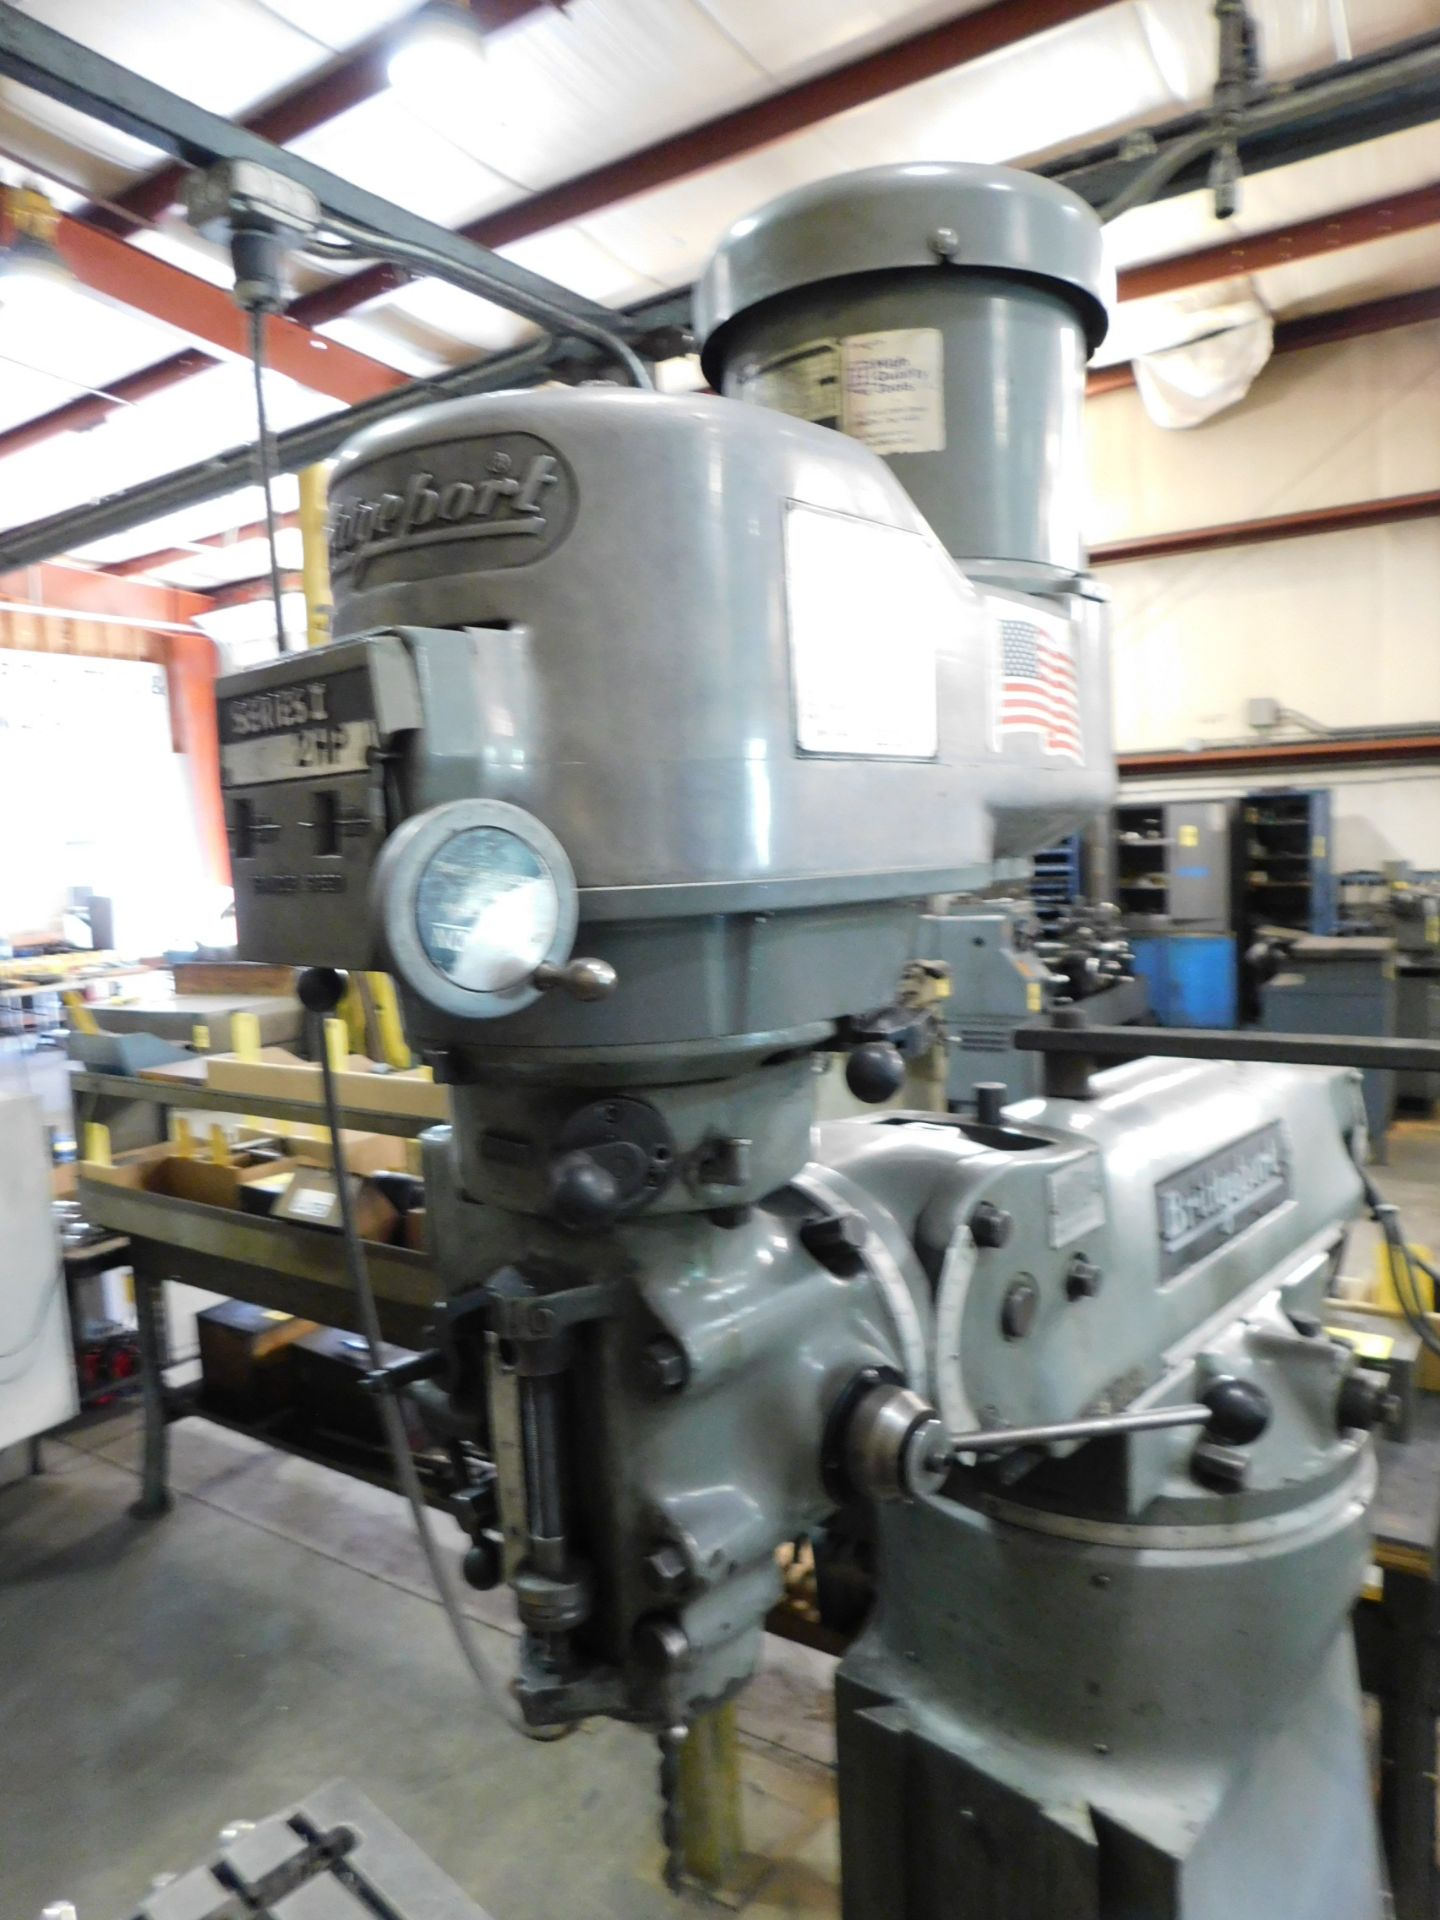 Bridgeport Series I, 2 HP Vertical Mill, s/n 12BR239284, 9” X 42” Table, Accurite D.R.O. - Image 9 of 11